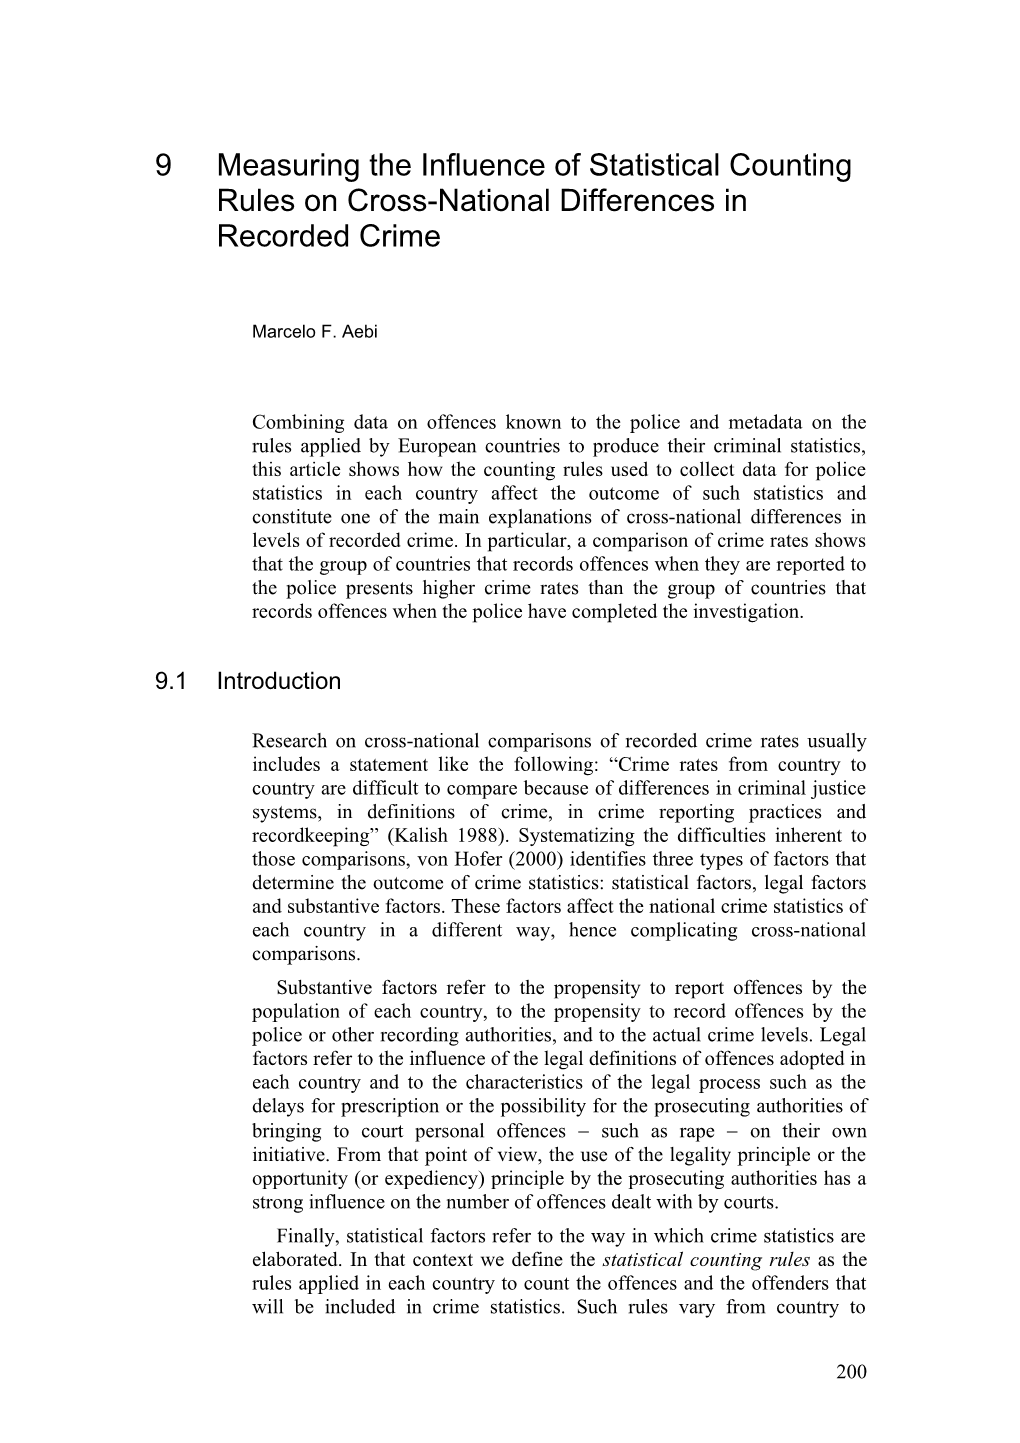 Eleventh United Nations Congress on Crime Prevention and Criminal Justice